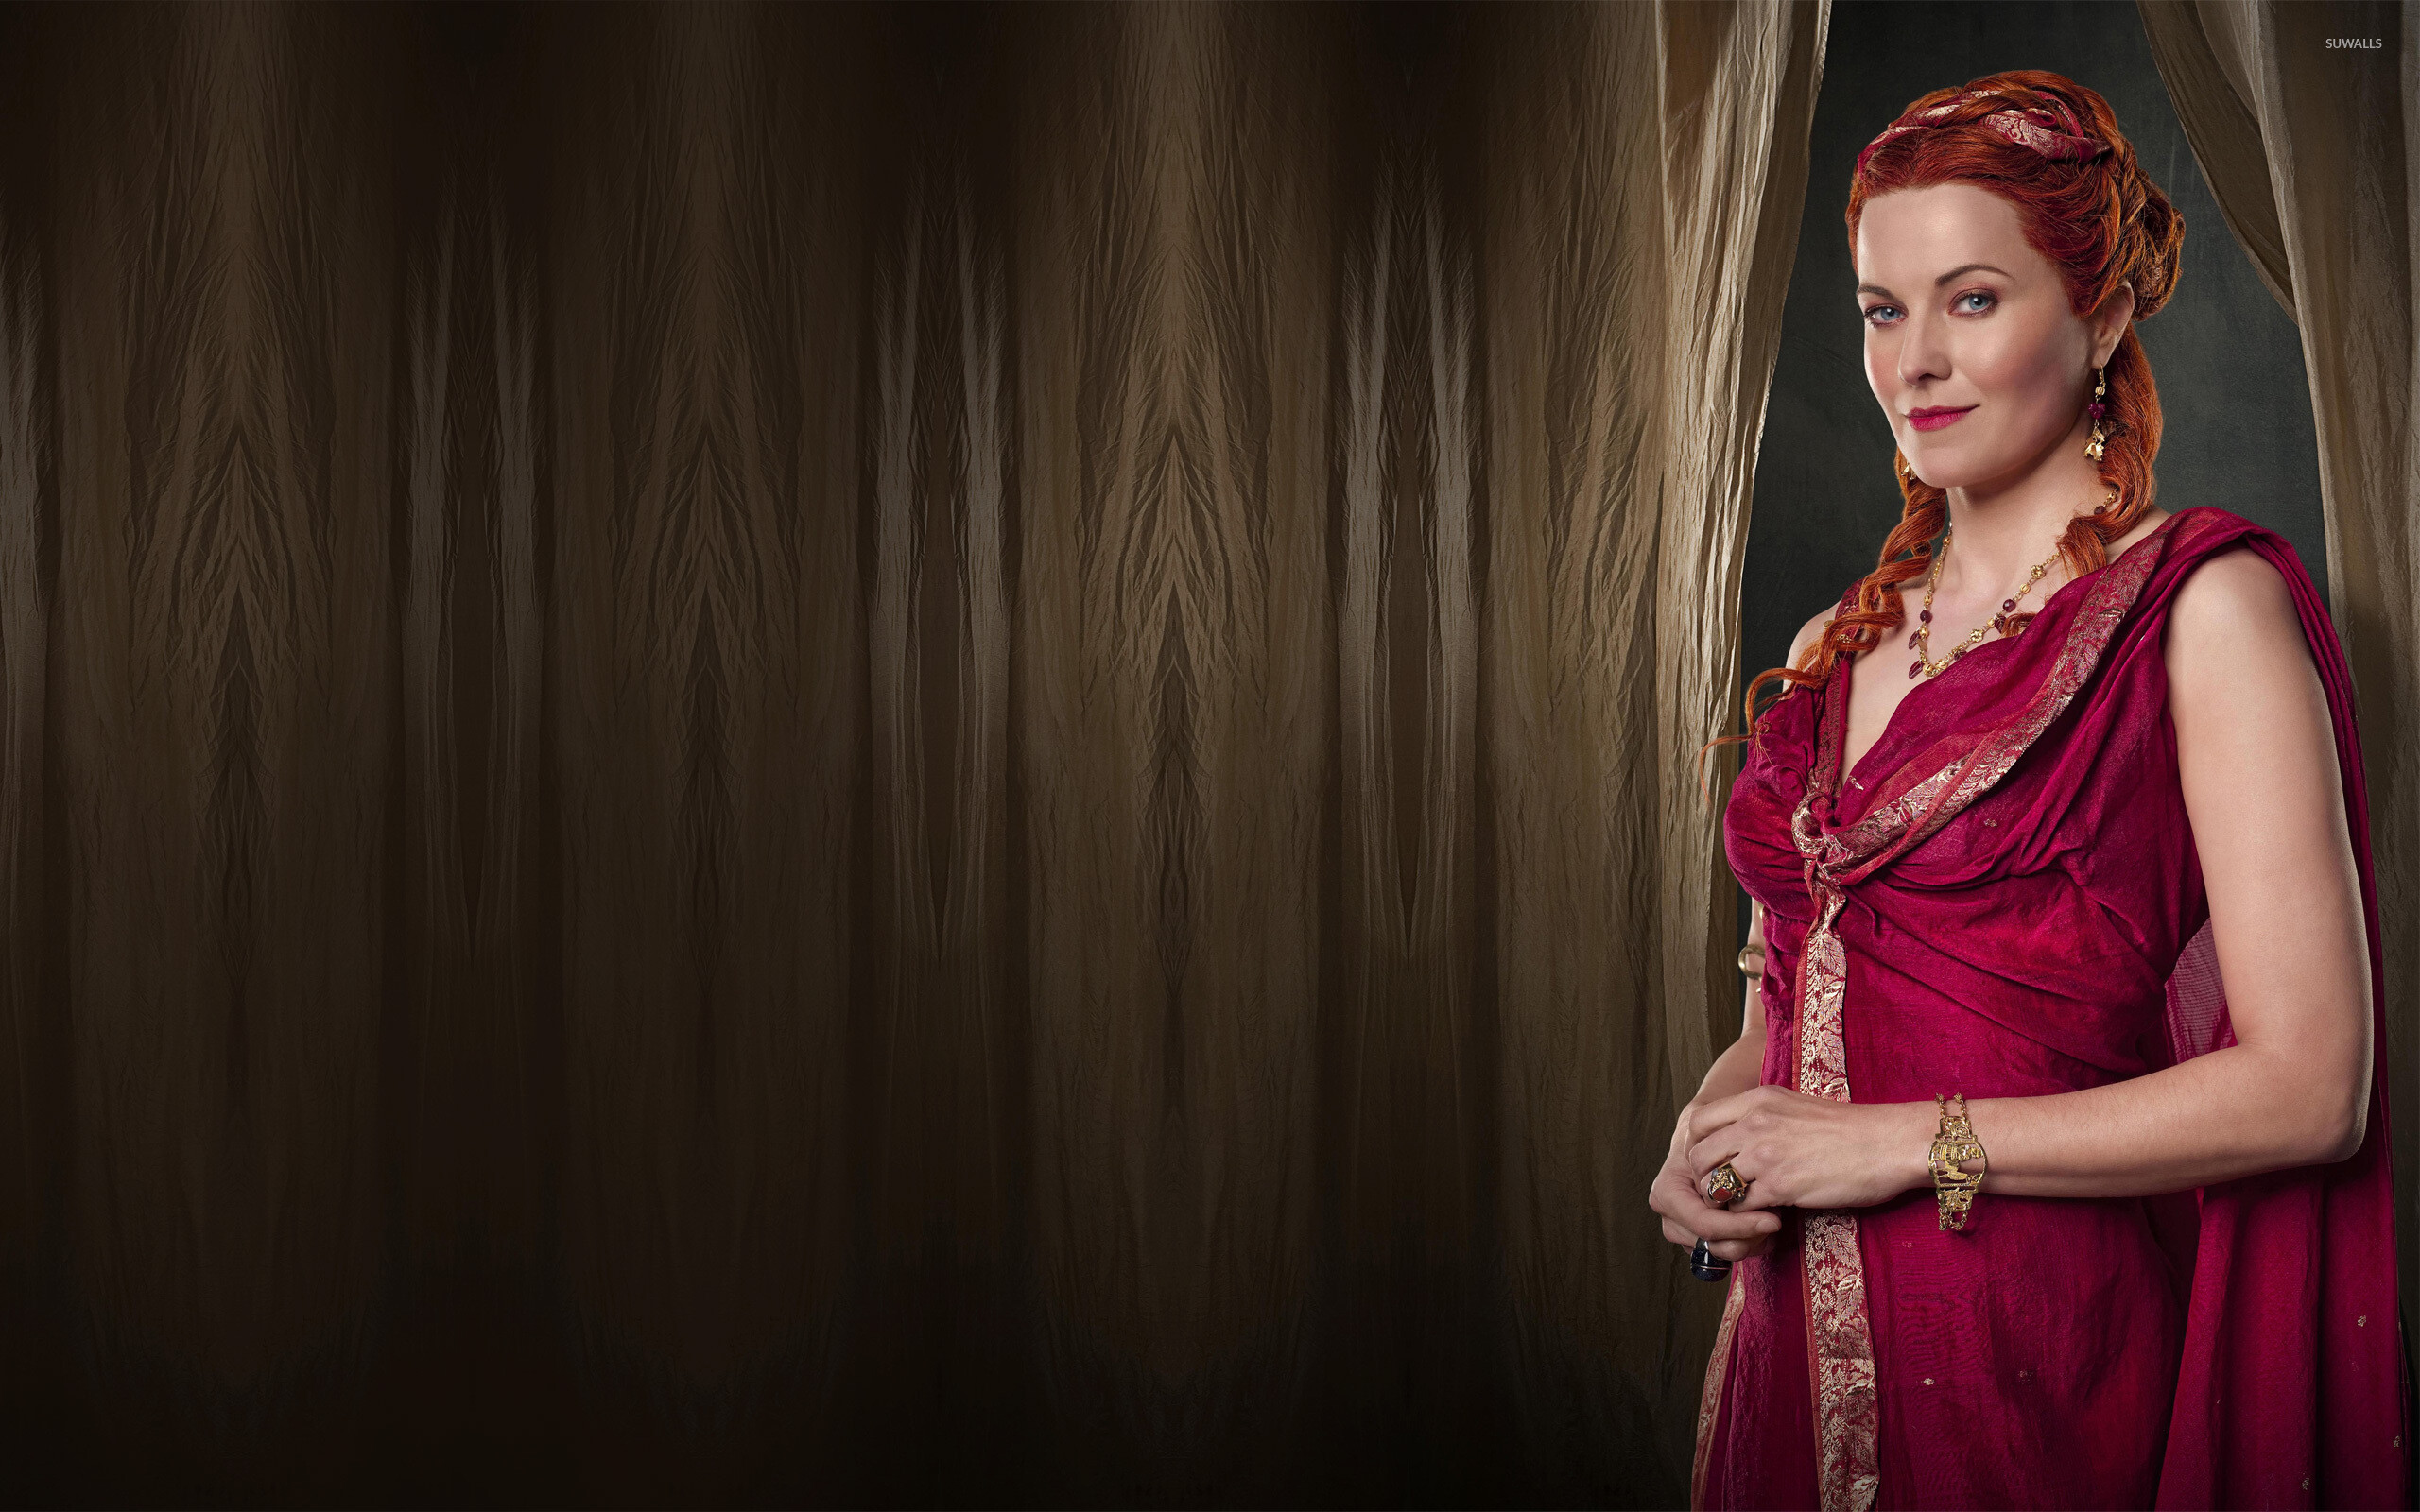 Spartacus: Gods of the Arena: Lucy Lawless as Lucretia – Batiatus' wife, TV show. 2560x1600 HD Wallpaper.